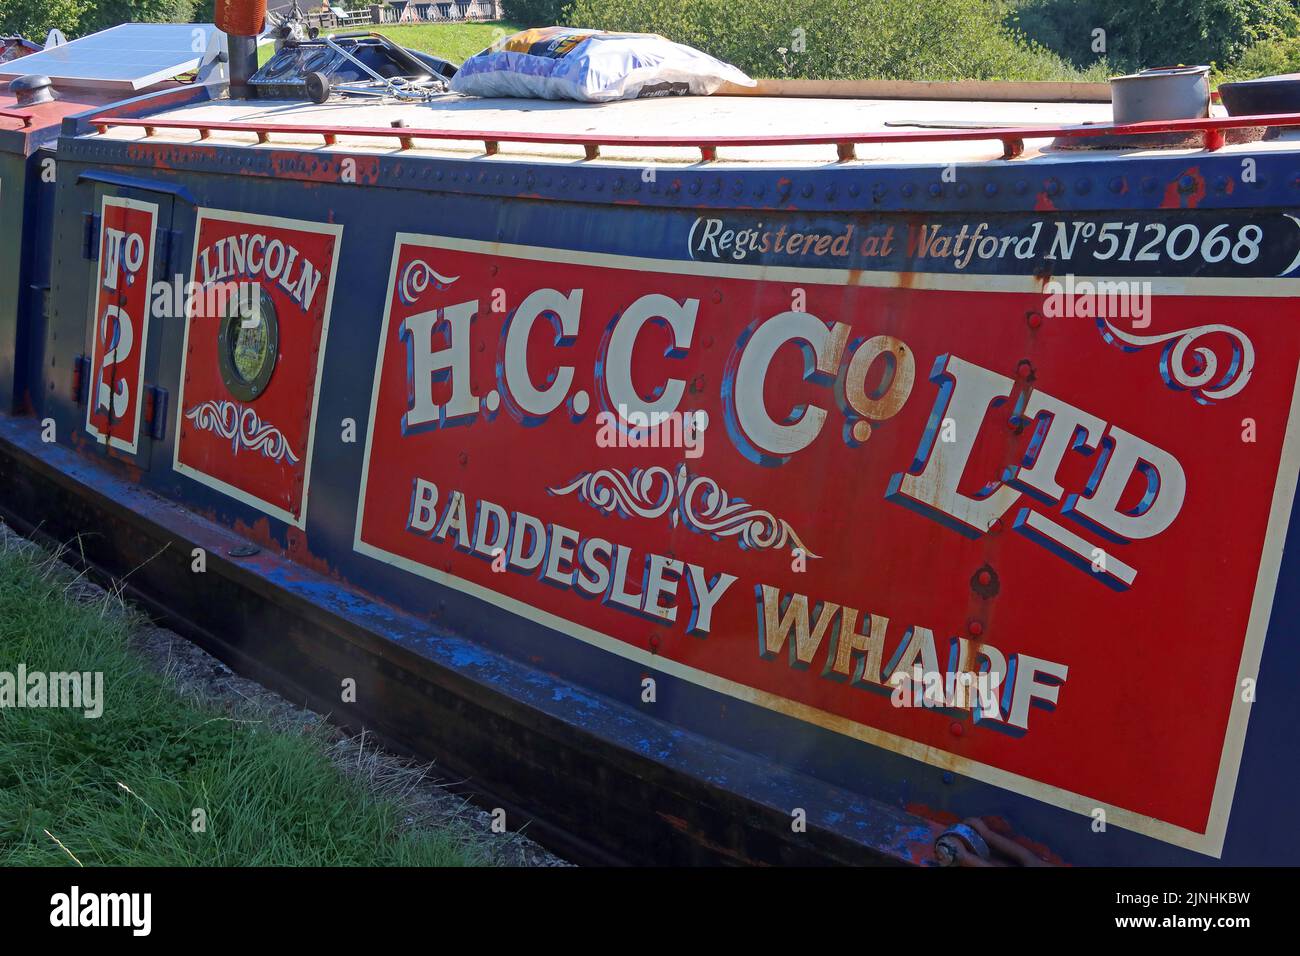 Lincoln No2 HCC Co Ltd Baddesley Wharf Barge in Nantwich Marina, Basin End, Chester Road, Nantwich, Cheshire, England, CW5 8lb Stockfoto